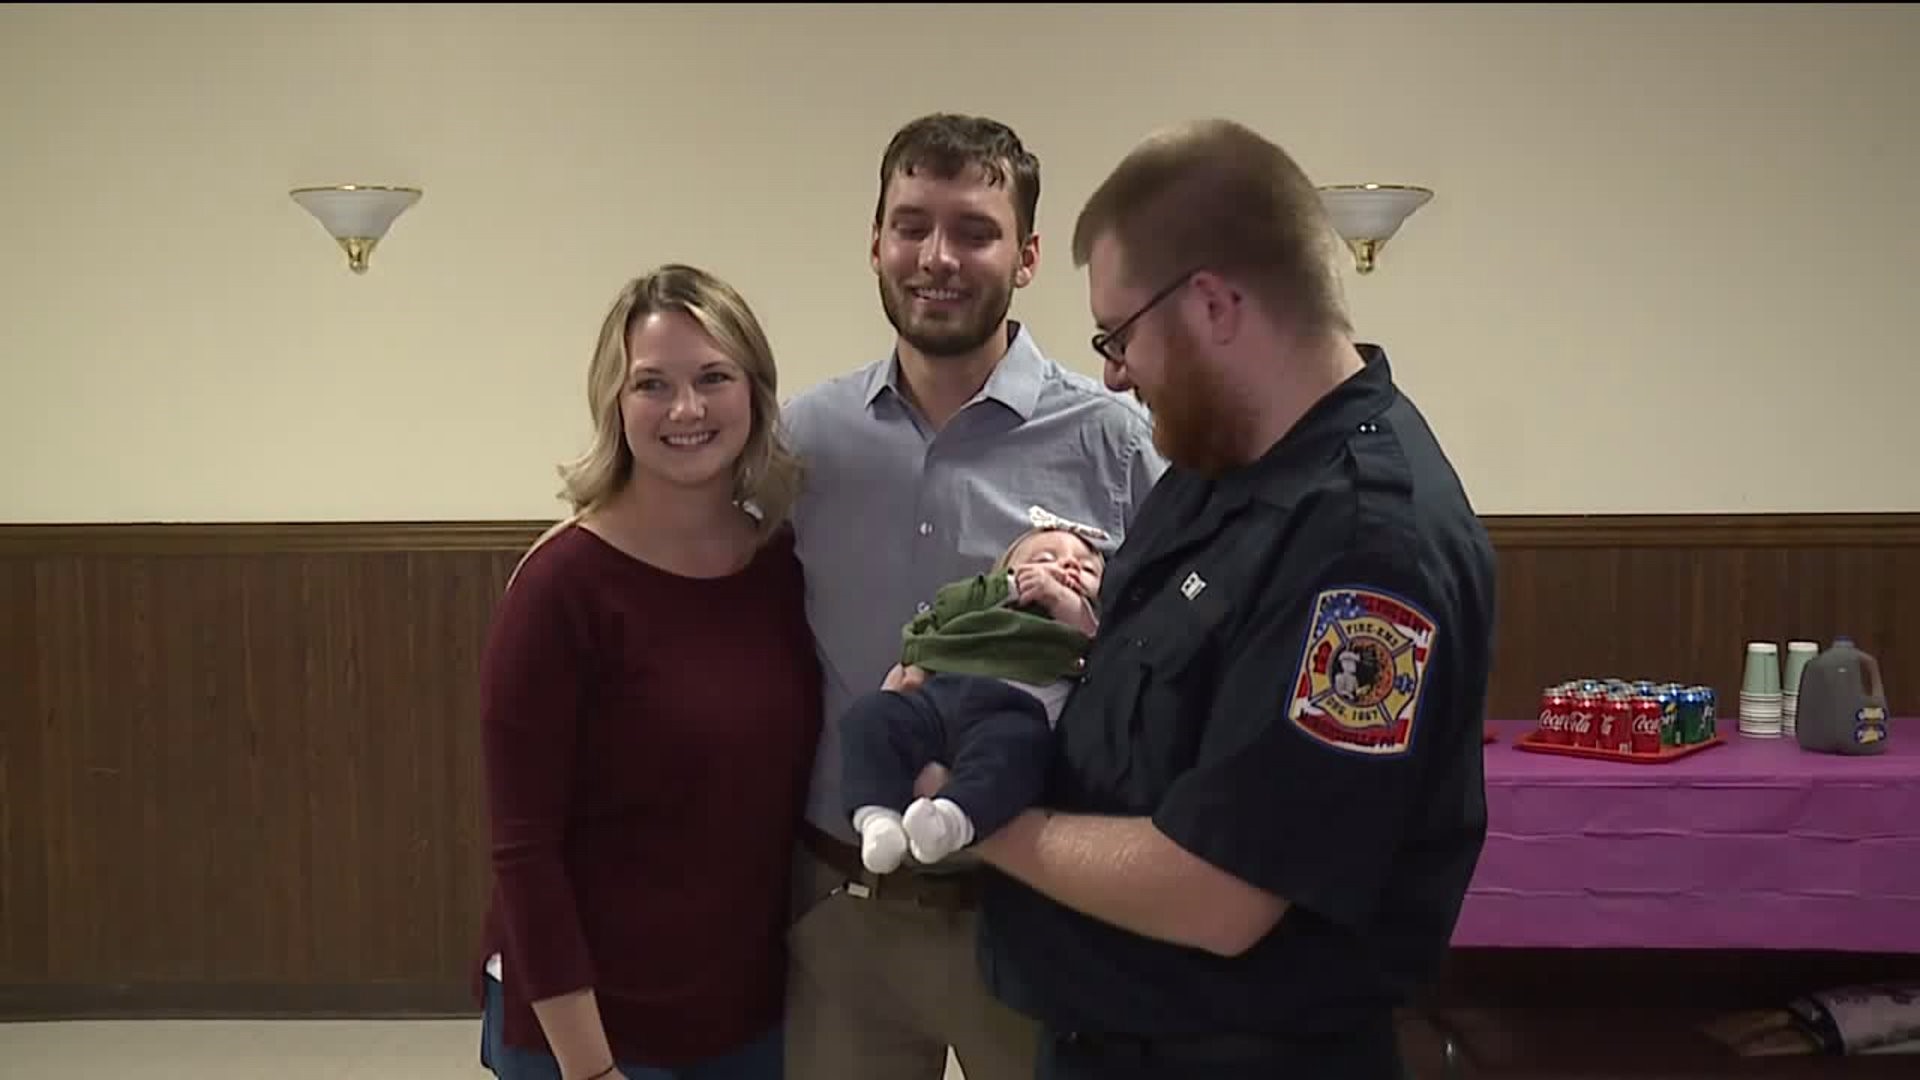 Couple Reunites with First Responders Who Delivered Baby